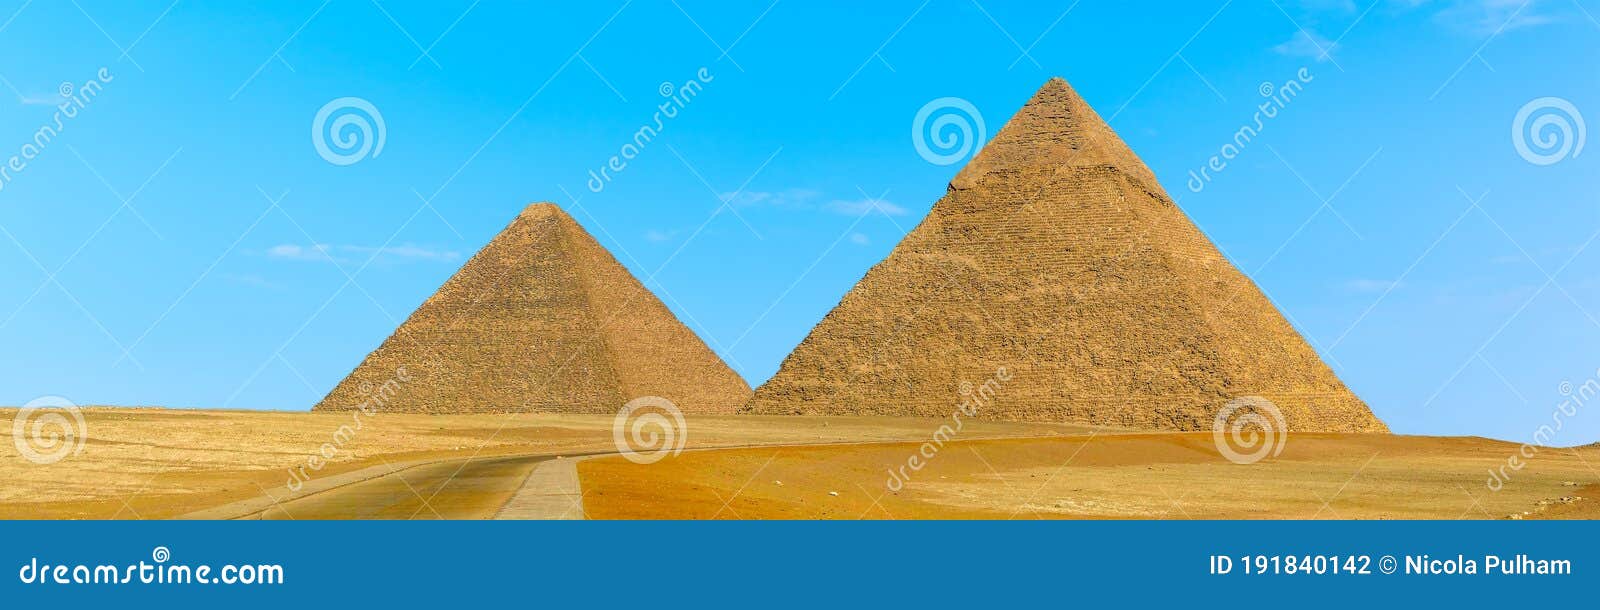 pyramids at giza, egypt protrude majestically into a blue cloudless sky